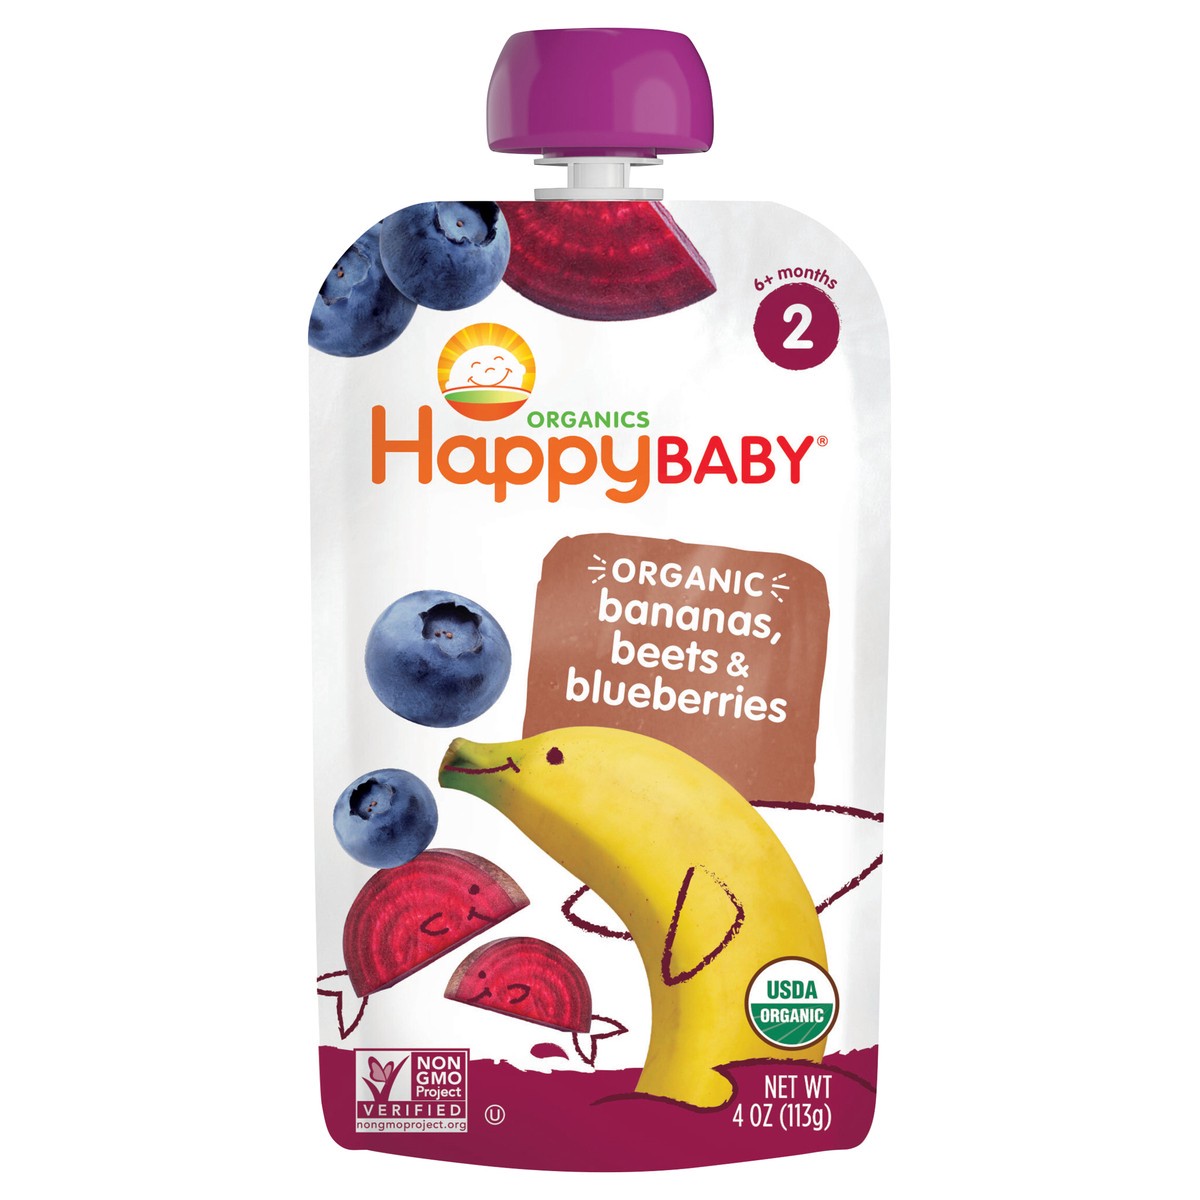 slide 1 of 3, Happy Baby Organics Stage 2 Organic Bananas, Beets & Blueberries Pouch 4 oz UNIT, 4 oz